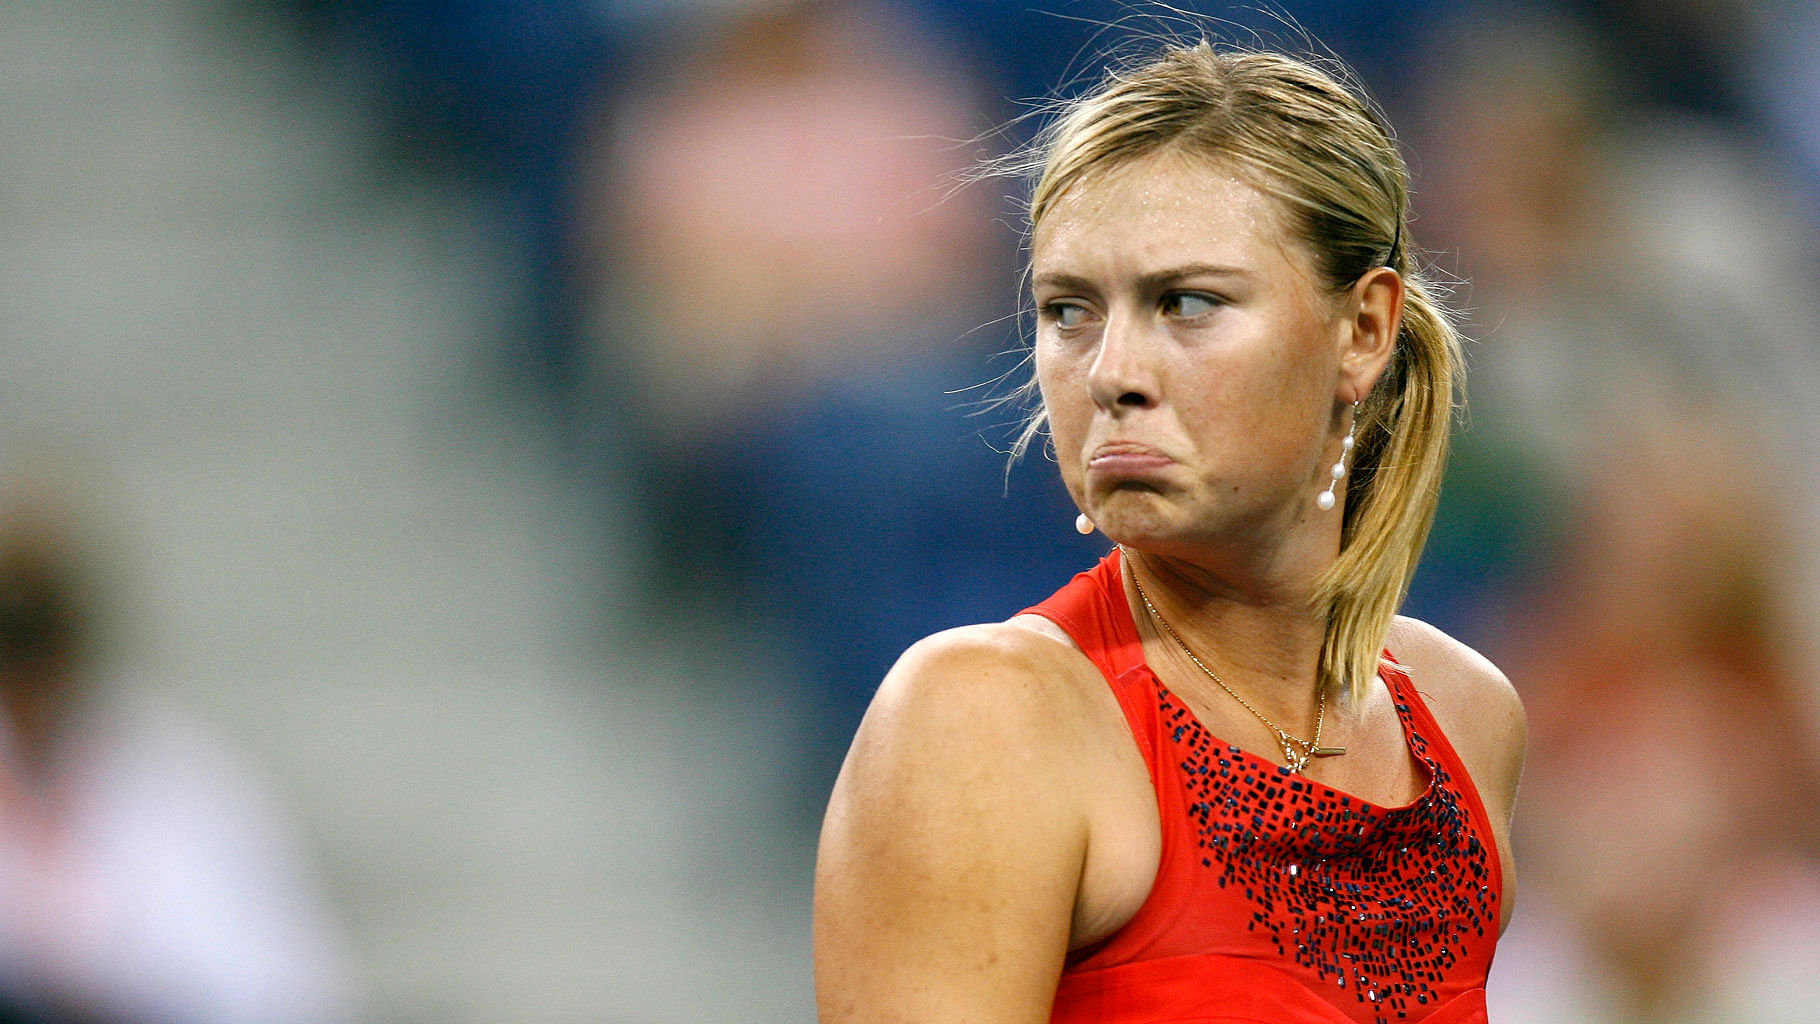 2007 file image of Maria Sharapova. The Russian tennis star admitted to failing a dope test at the Australian Open. (Photo: Reuters)